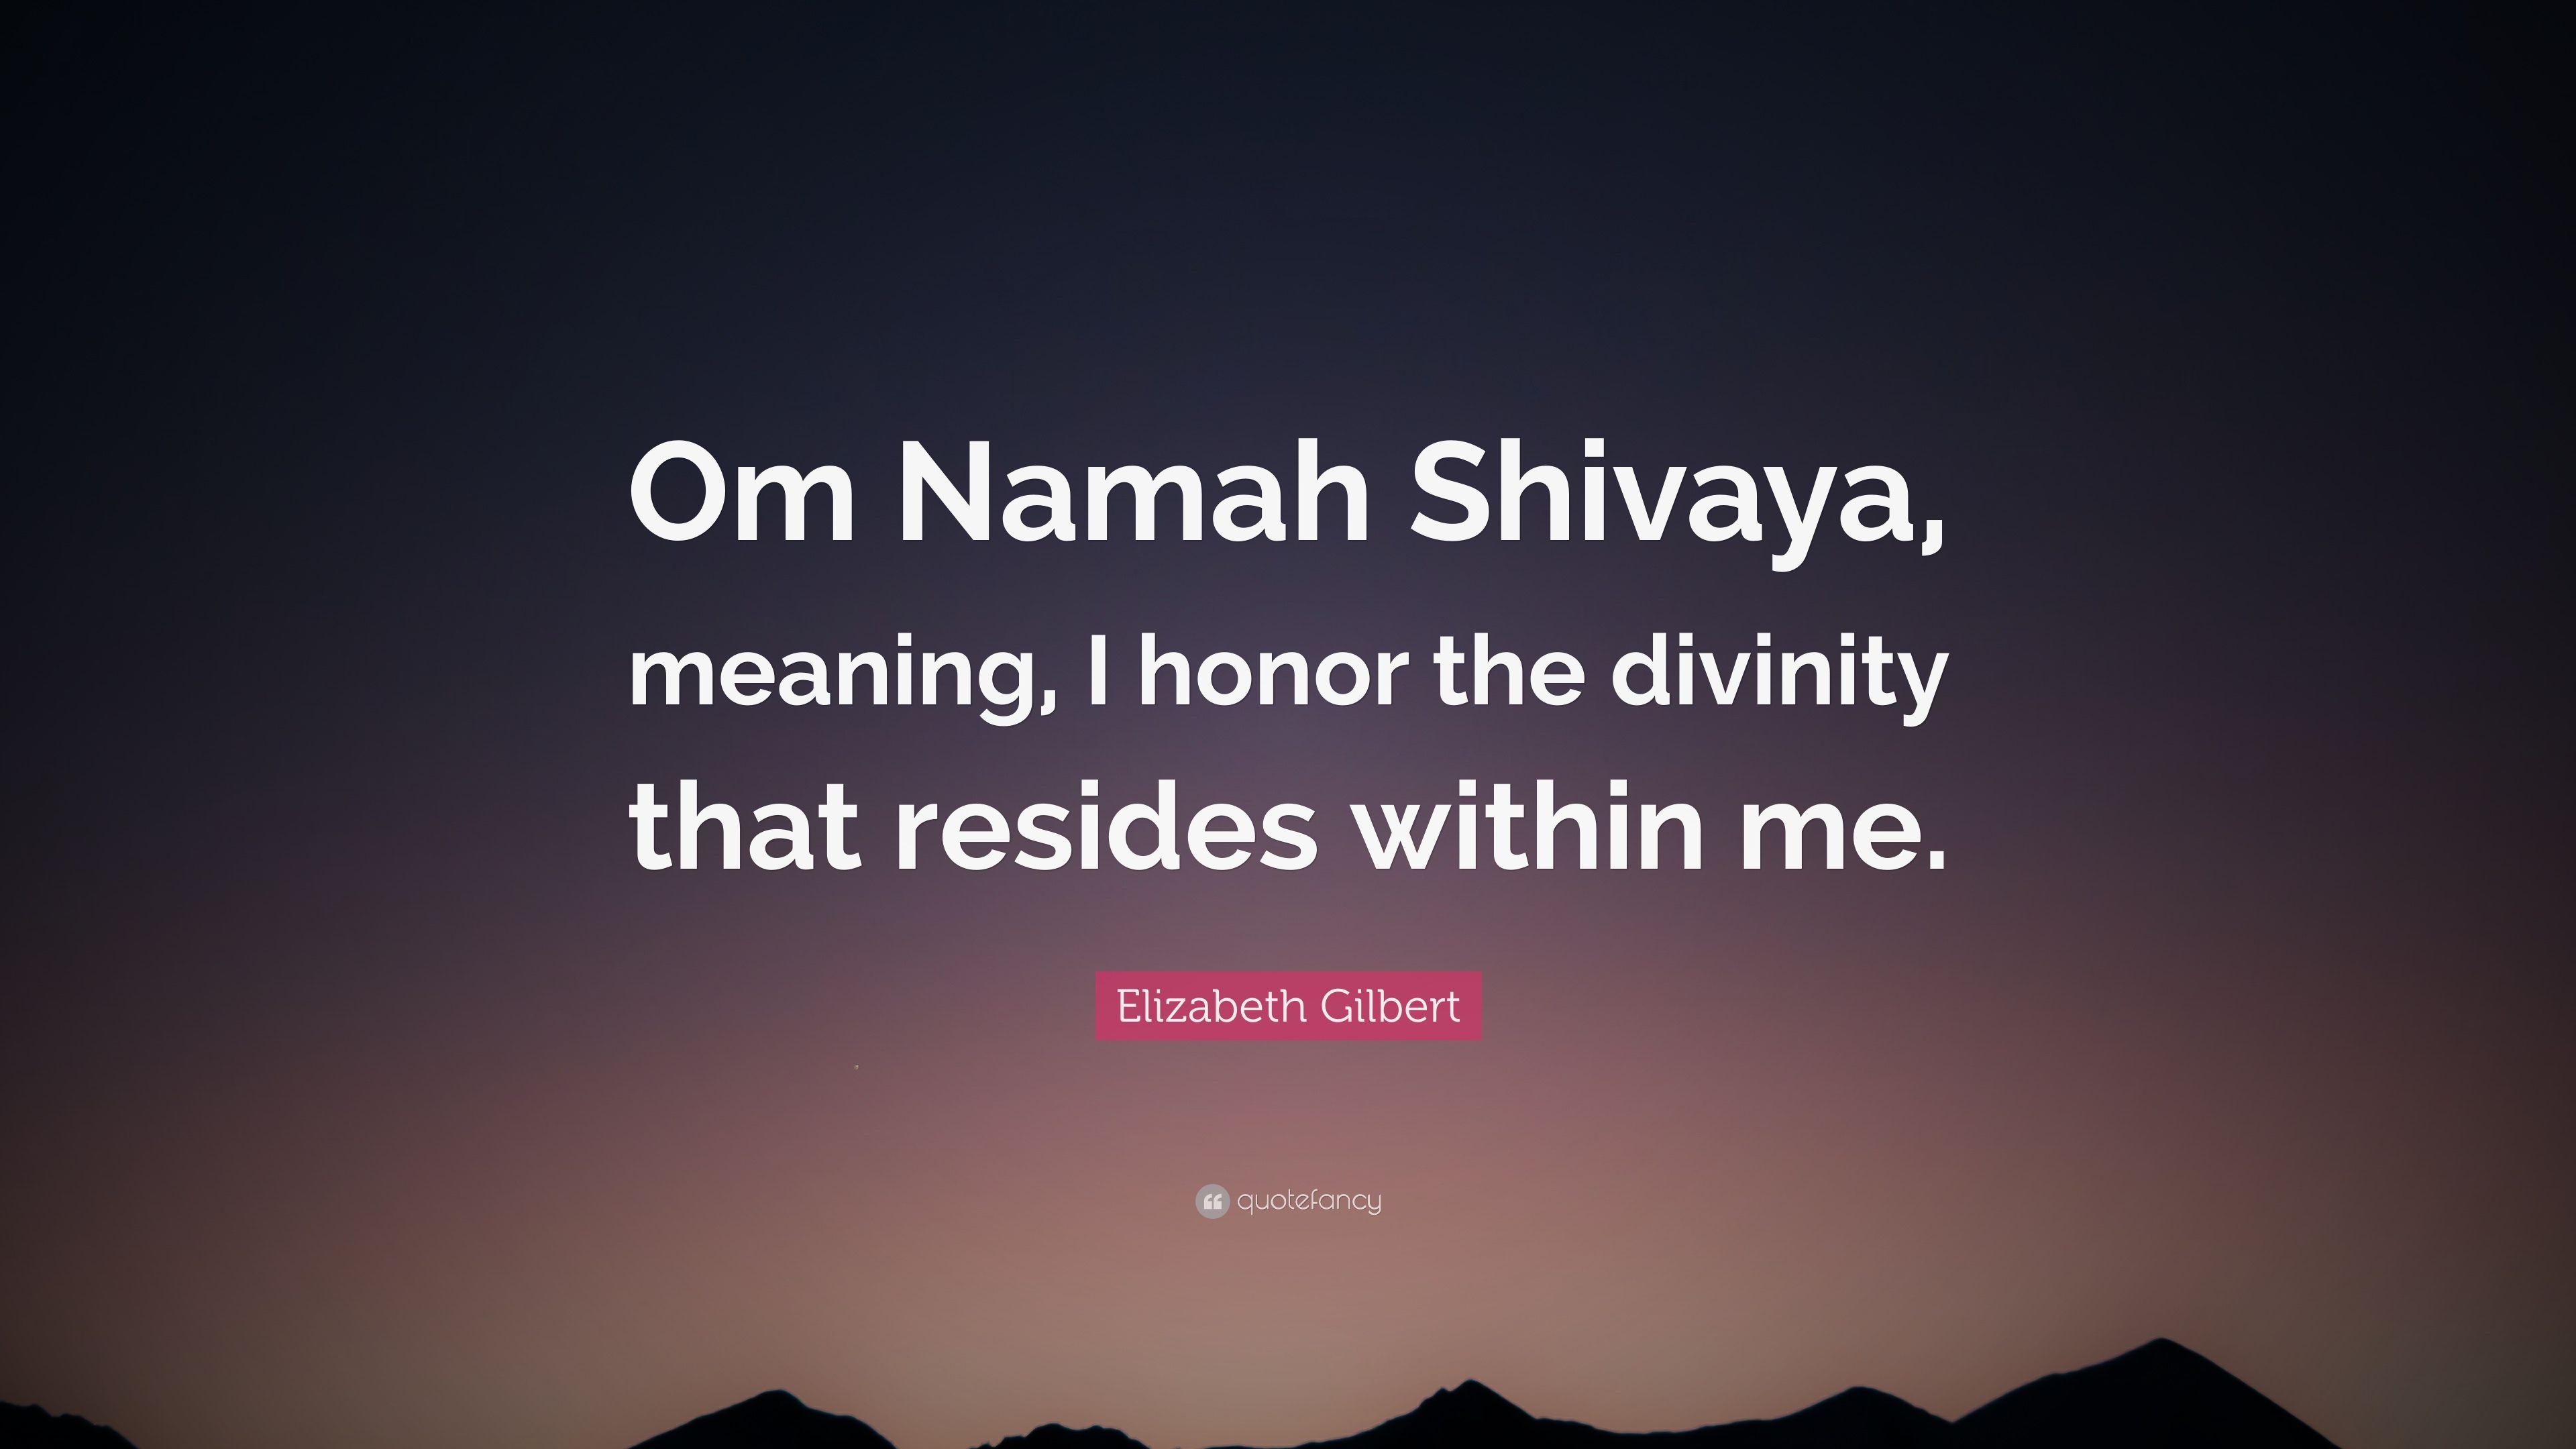 Elizabeth Gilbert Quote: “Om Namah Shivaya, meaning, I honor the divinity that resides within me.” (12 wallpaper)